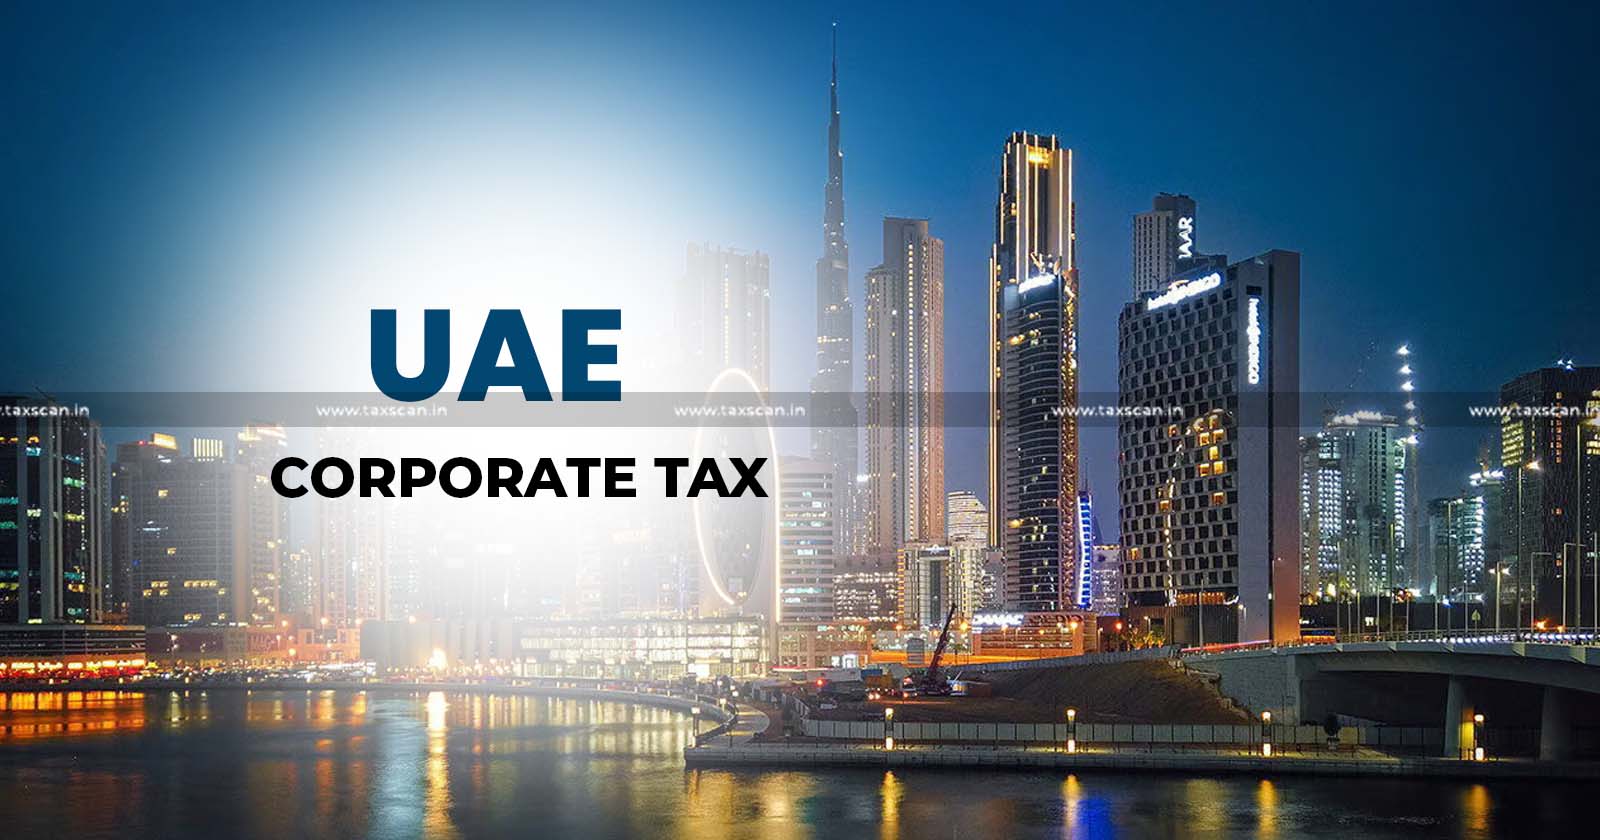 UAE Corporate Tax - Federal Tax Authority - Determination of applicability of Corporate Tax - taxscan